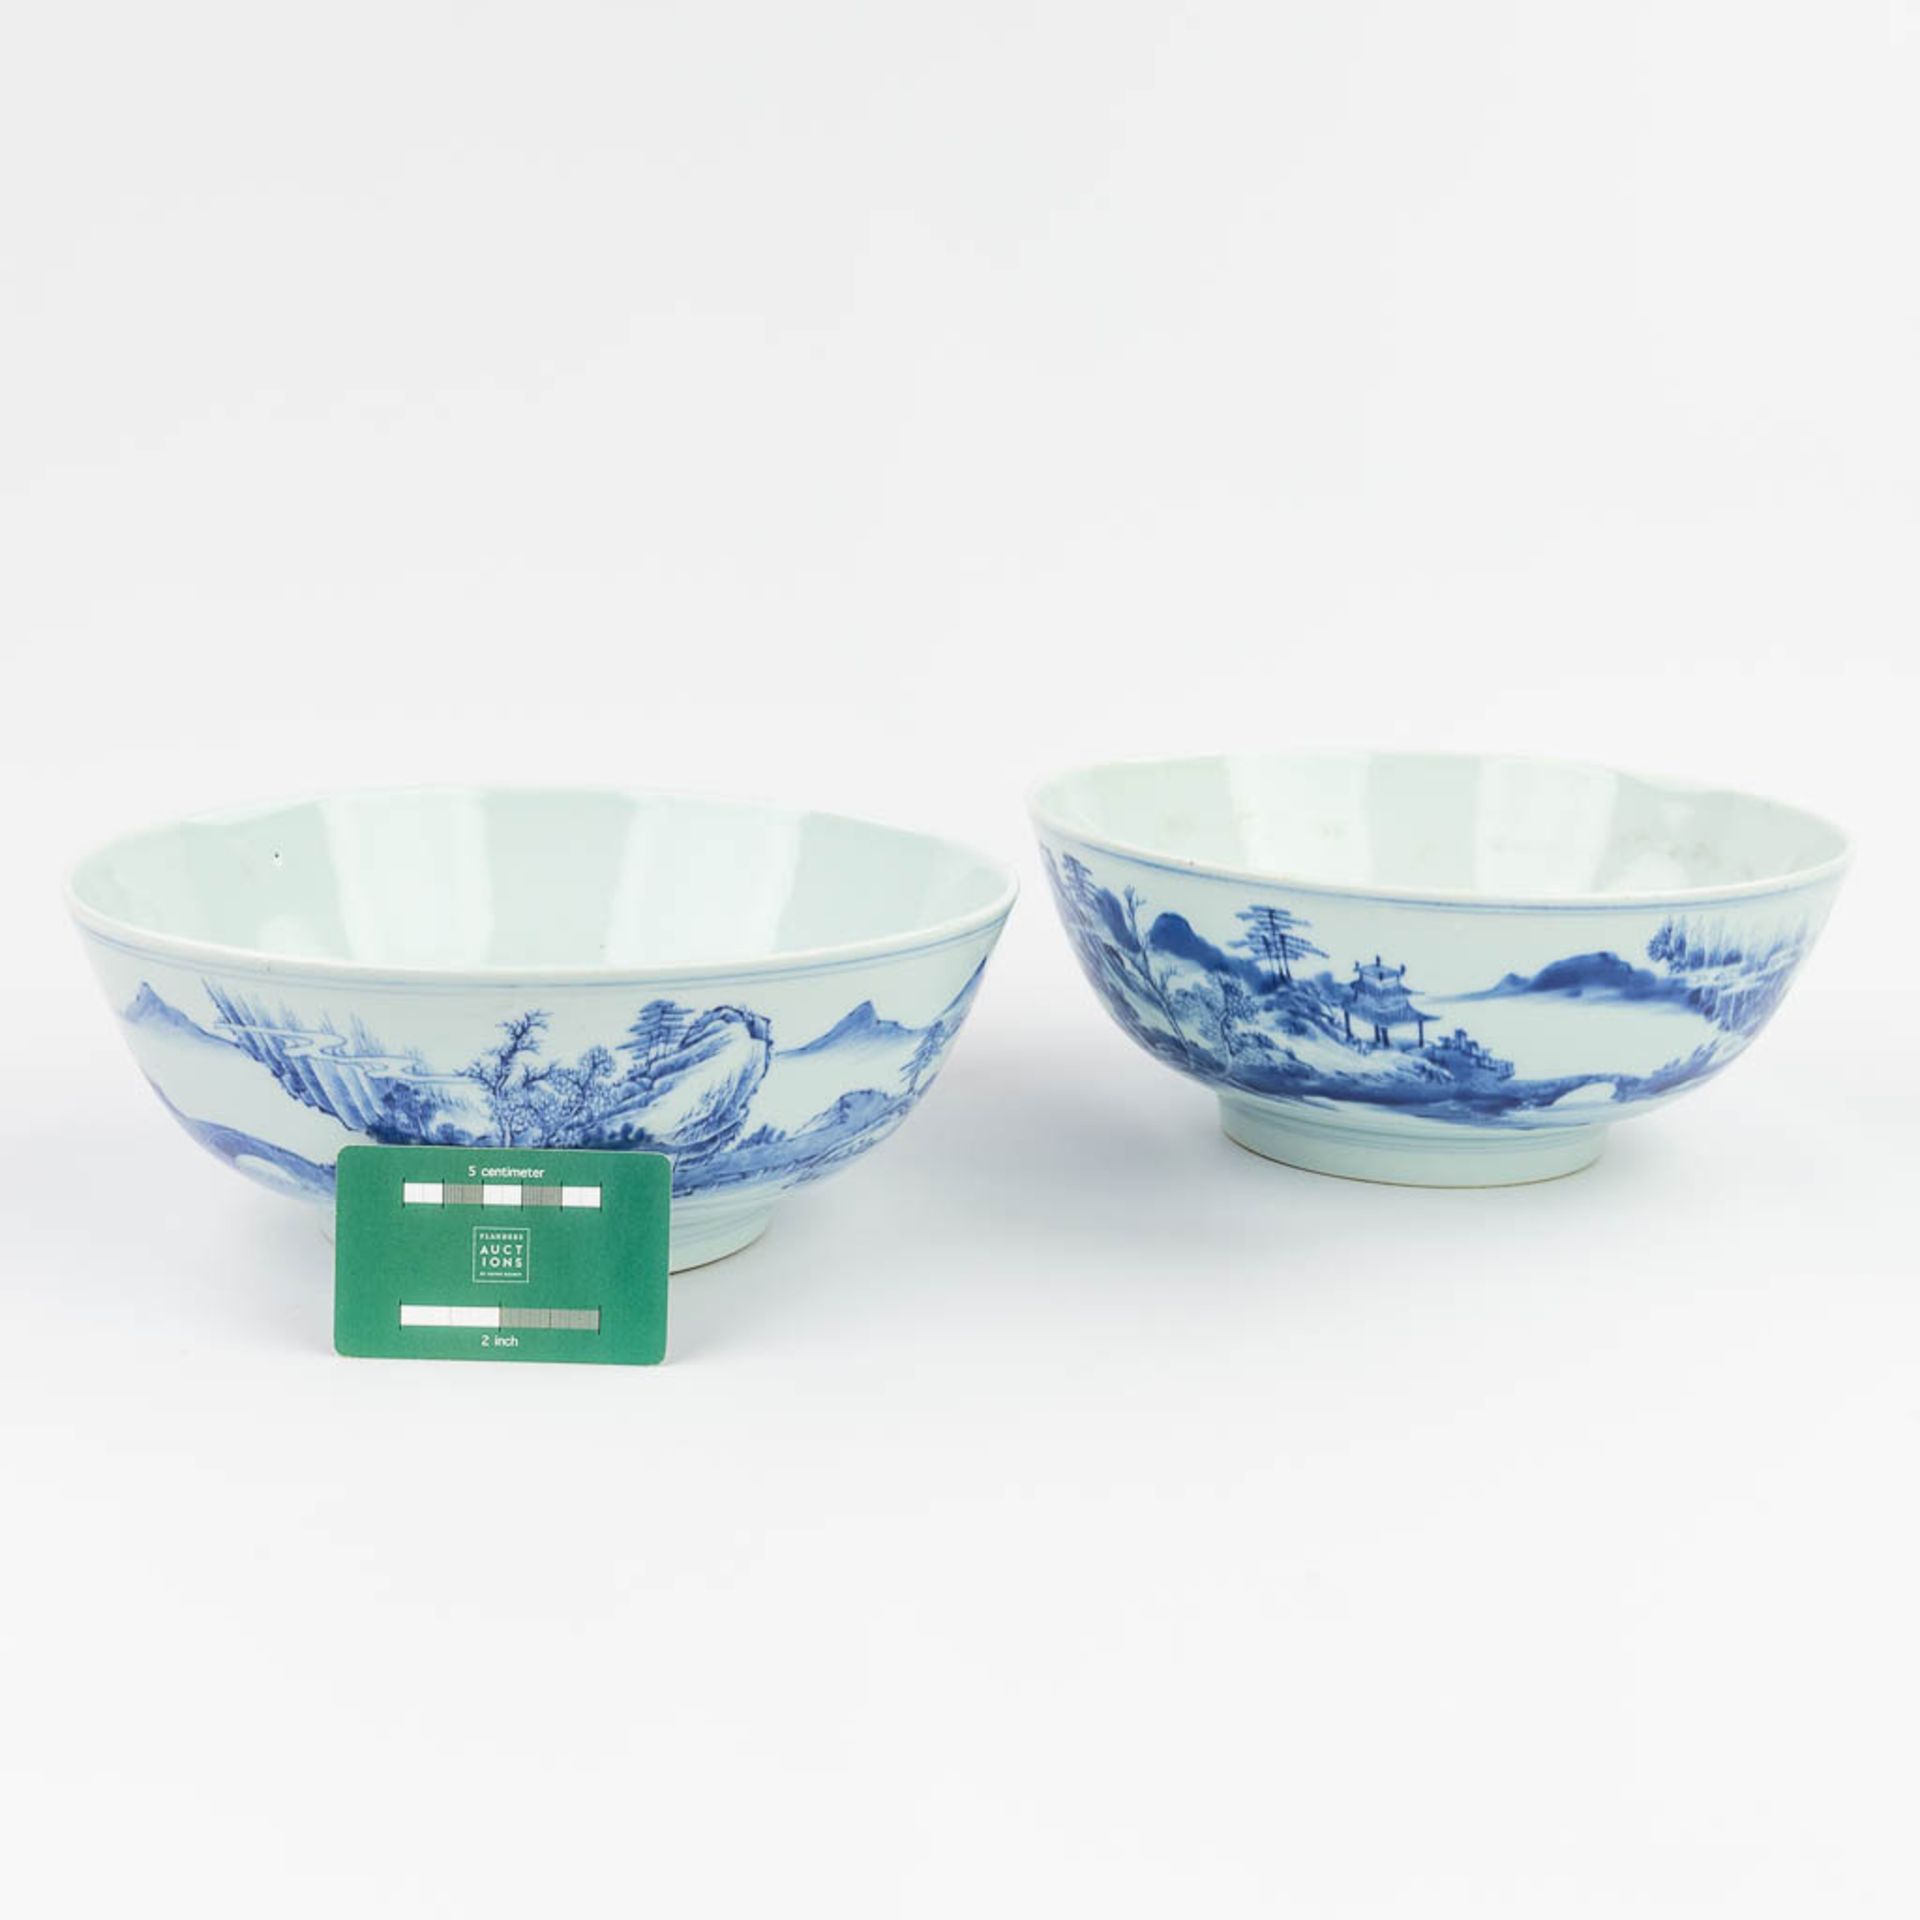 A pair of Chinese bowls made of blue-white porcelain (11 x 26,5 cm) - Image 4 of 17